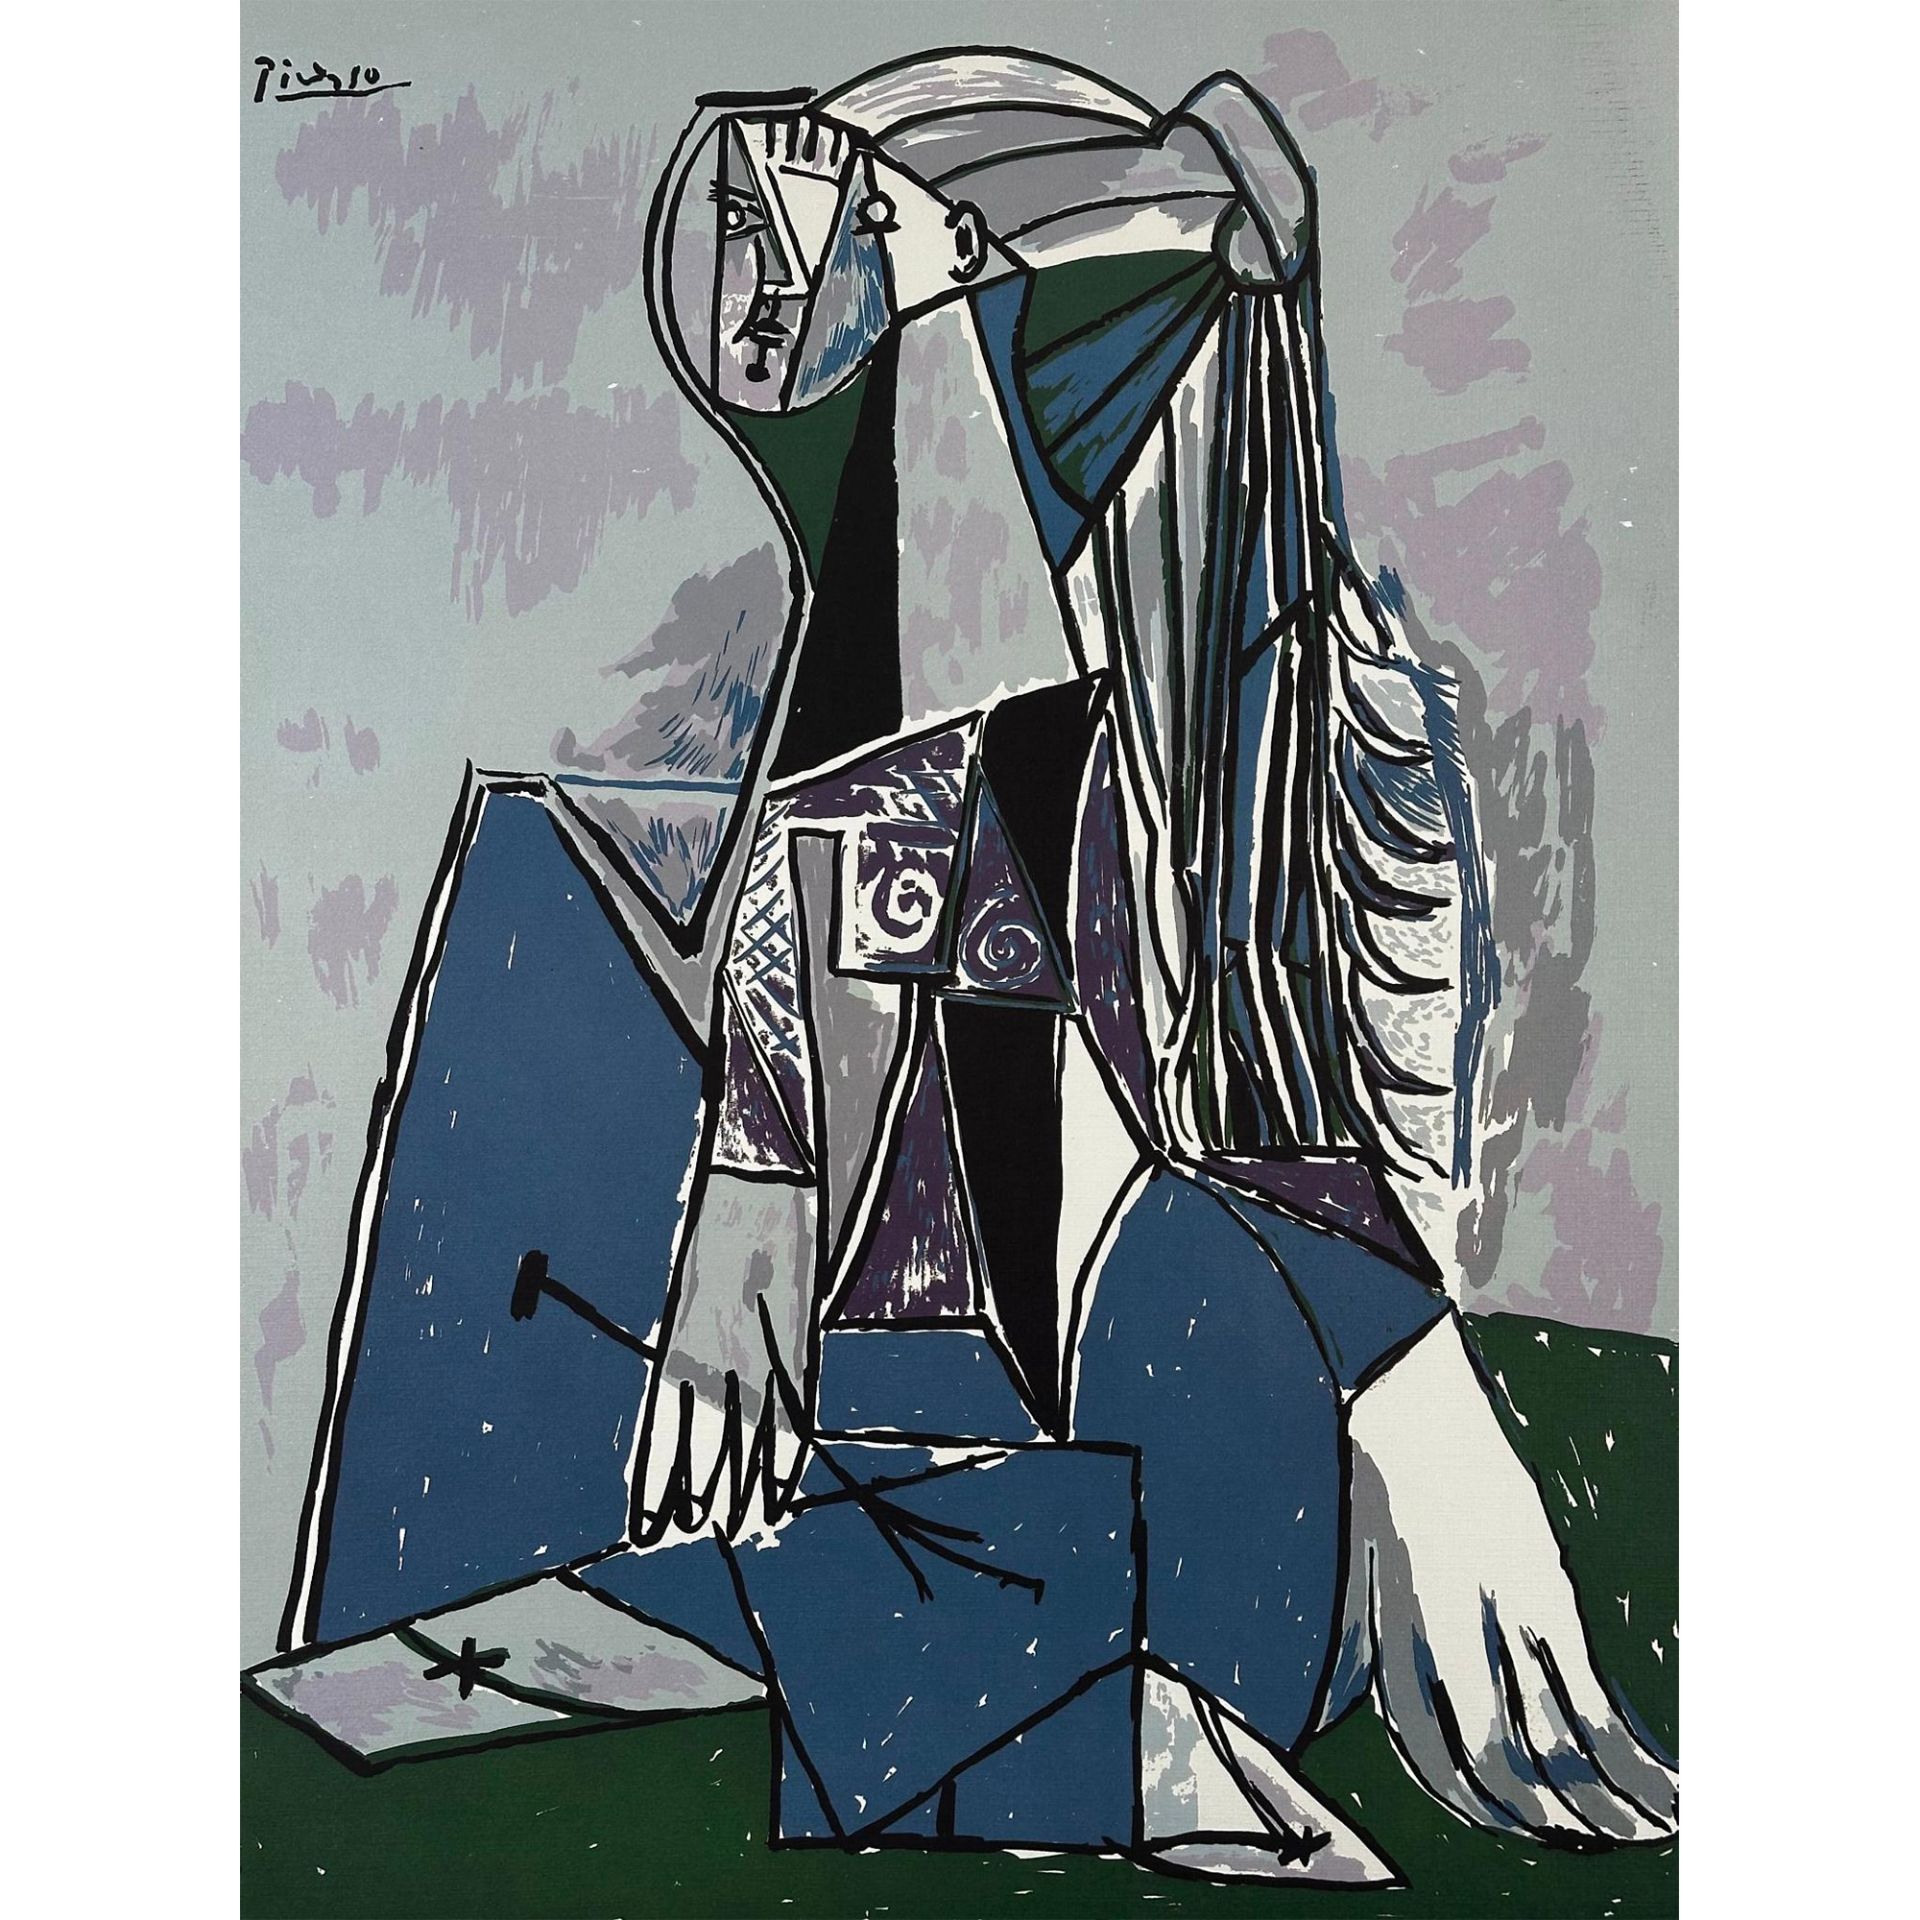 Pablo Picasso (Spanish, 1881-1973) Recreation in a limited edition Lithograph, Untitled, Facsimile S - Image 2 of 4